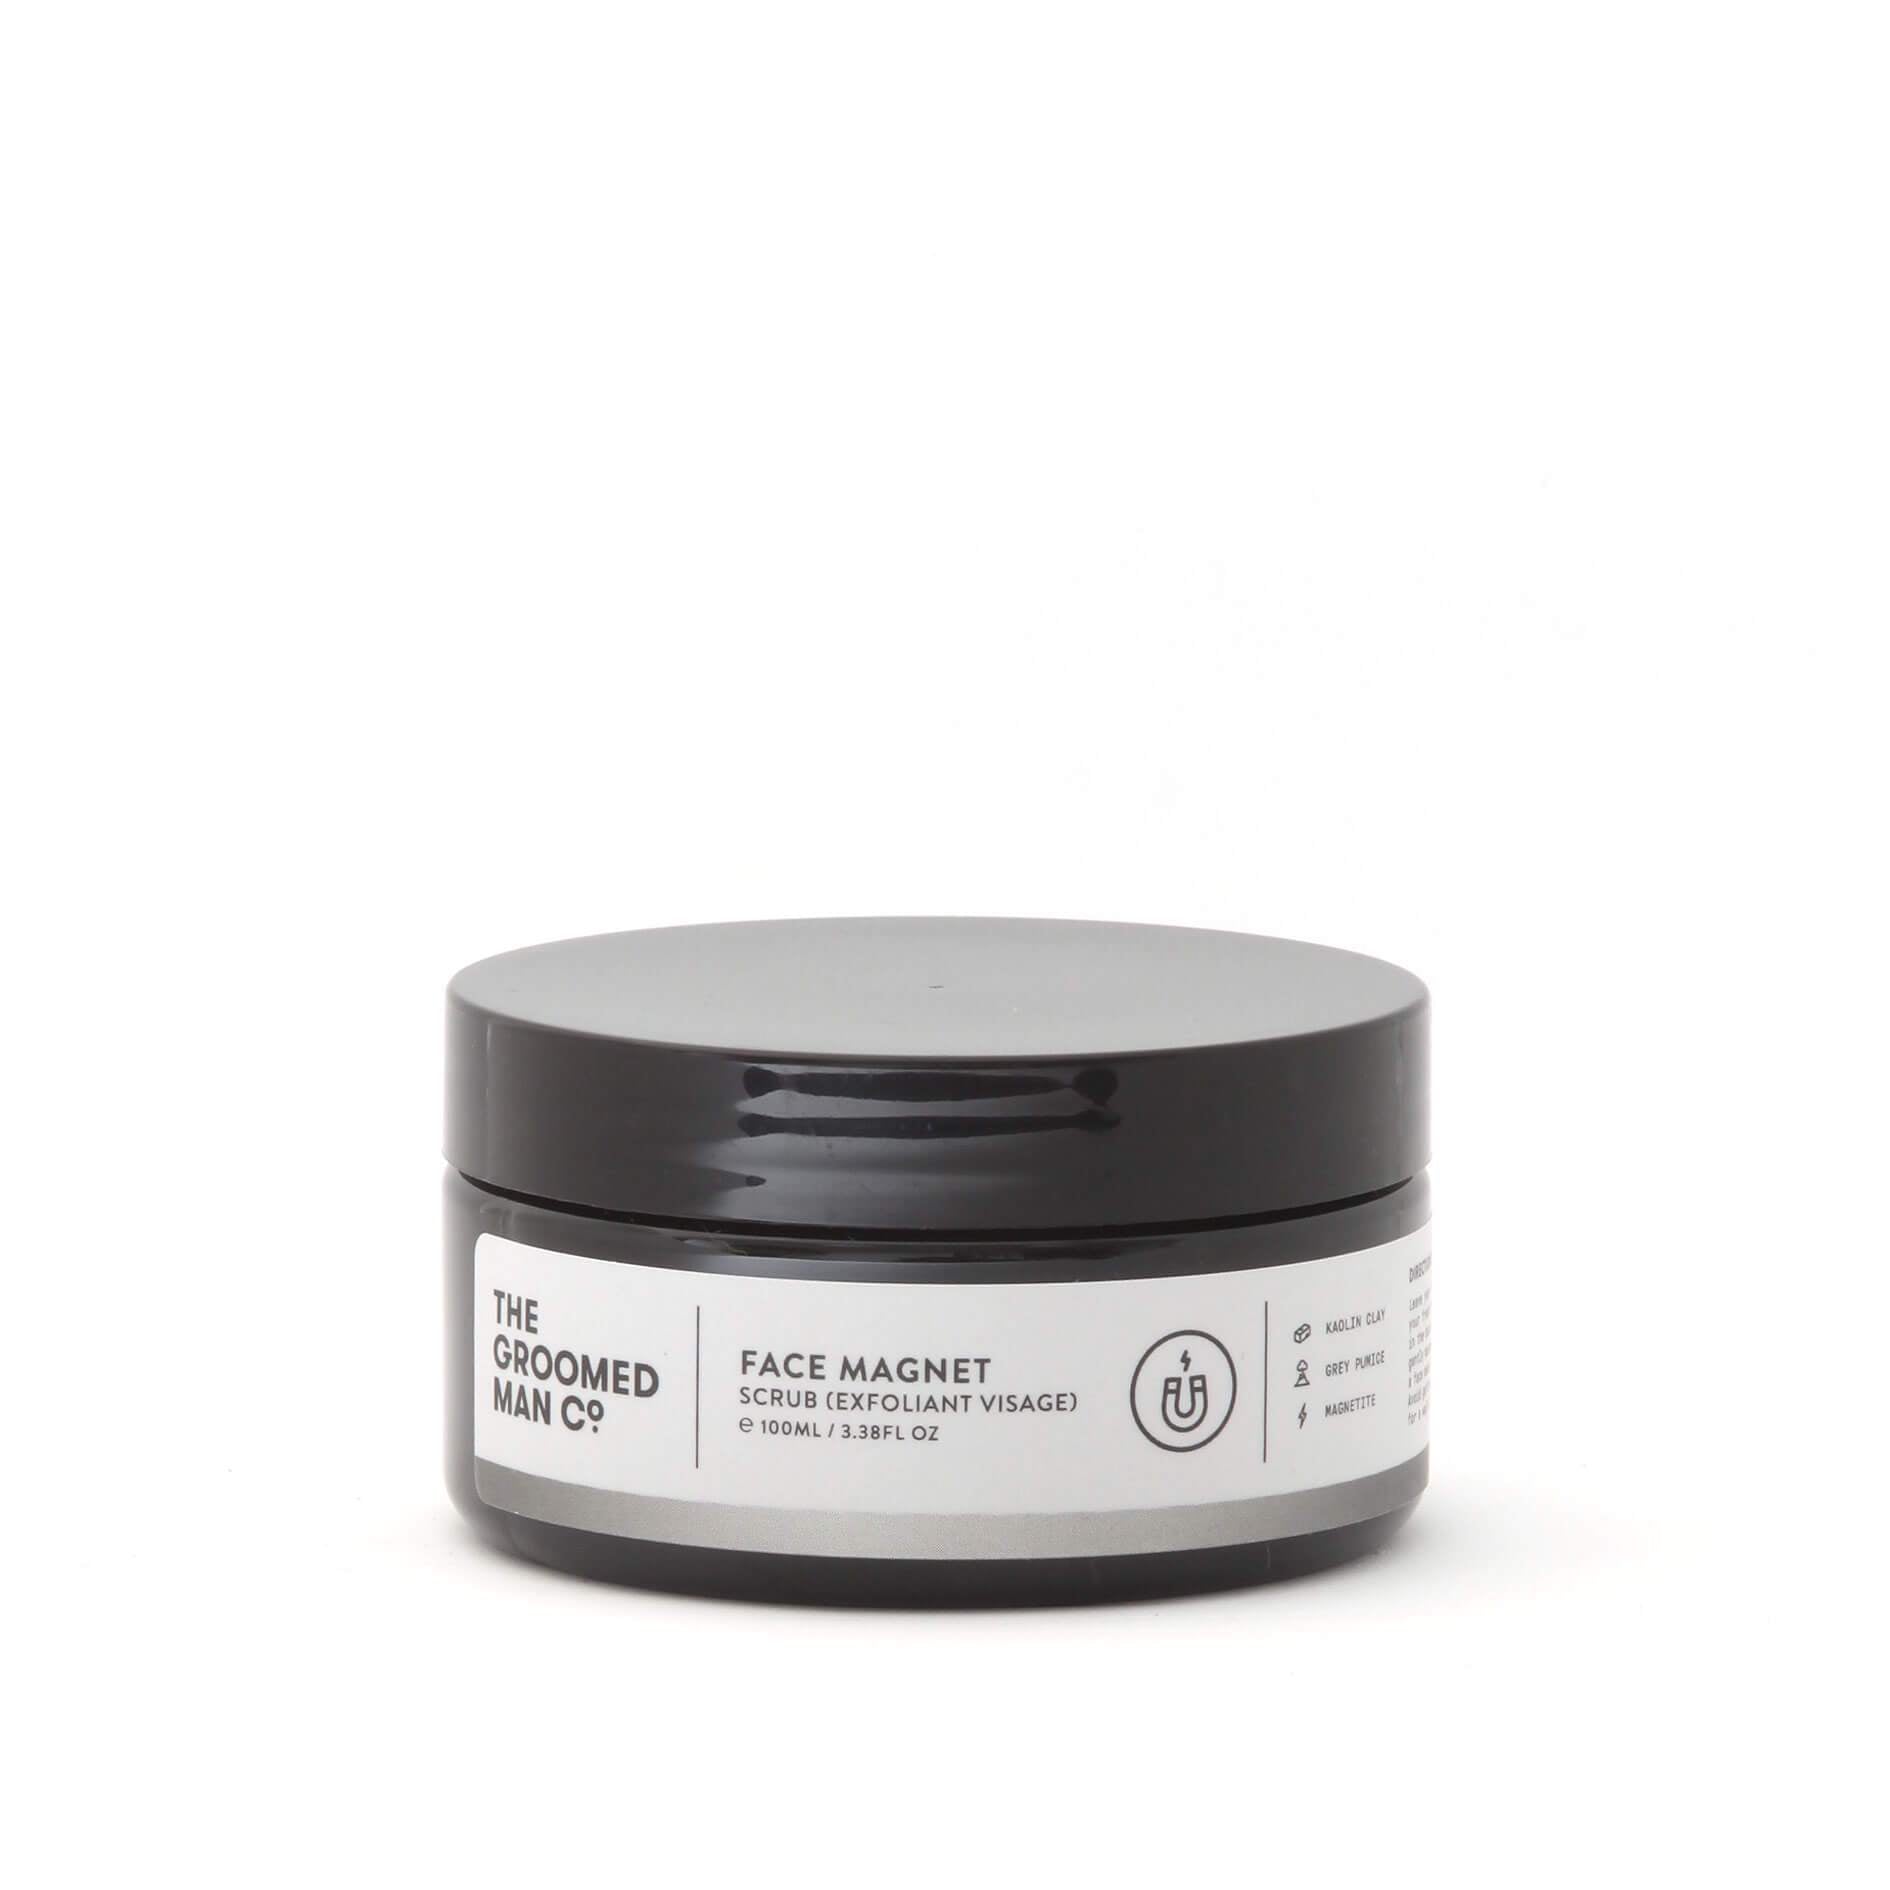 The Groomed Man Co Face Magnet Scrub